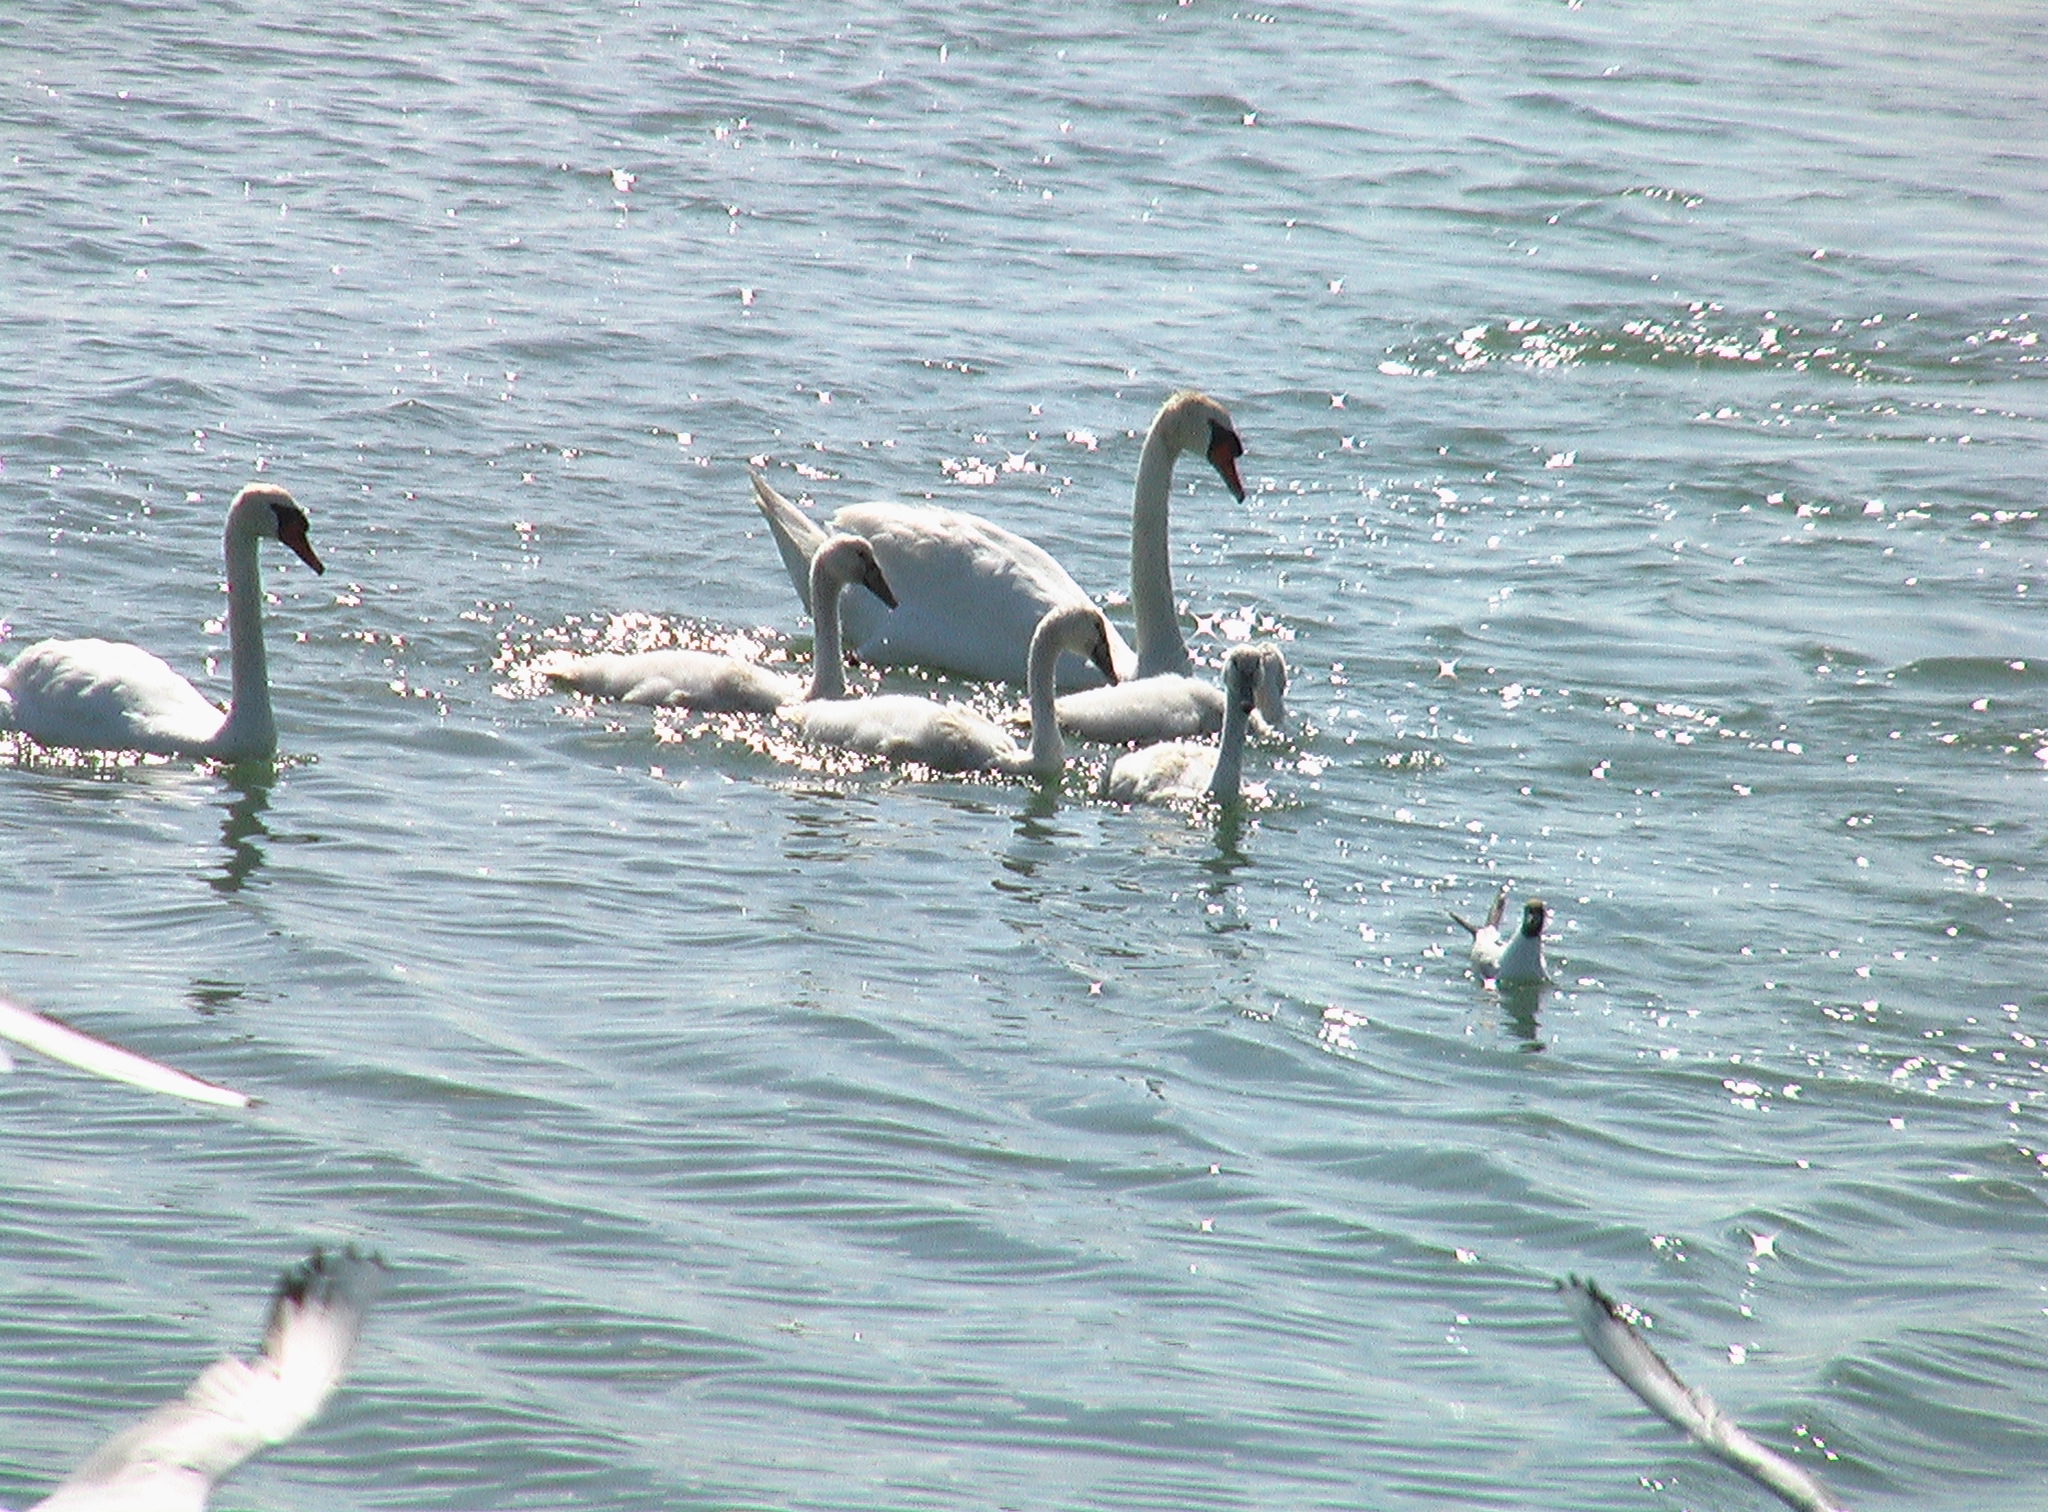 swans feeding on soing in the water by itself